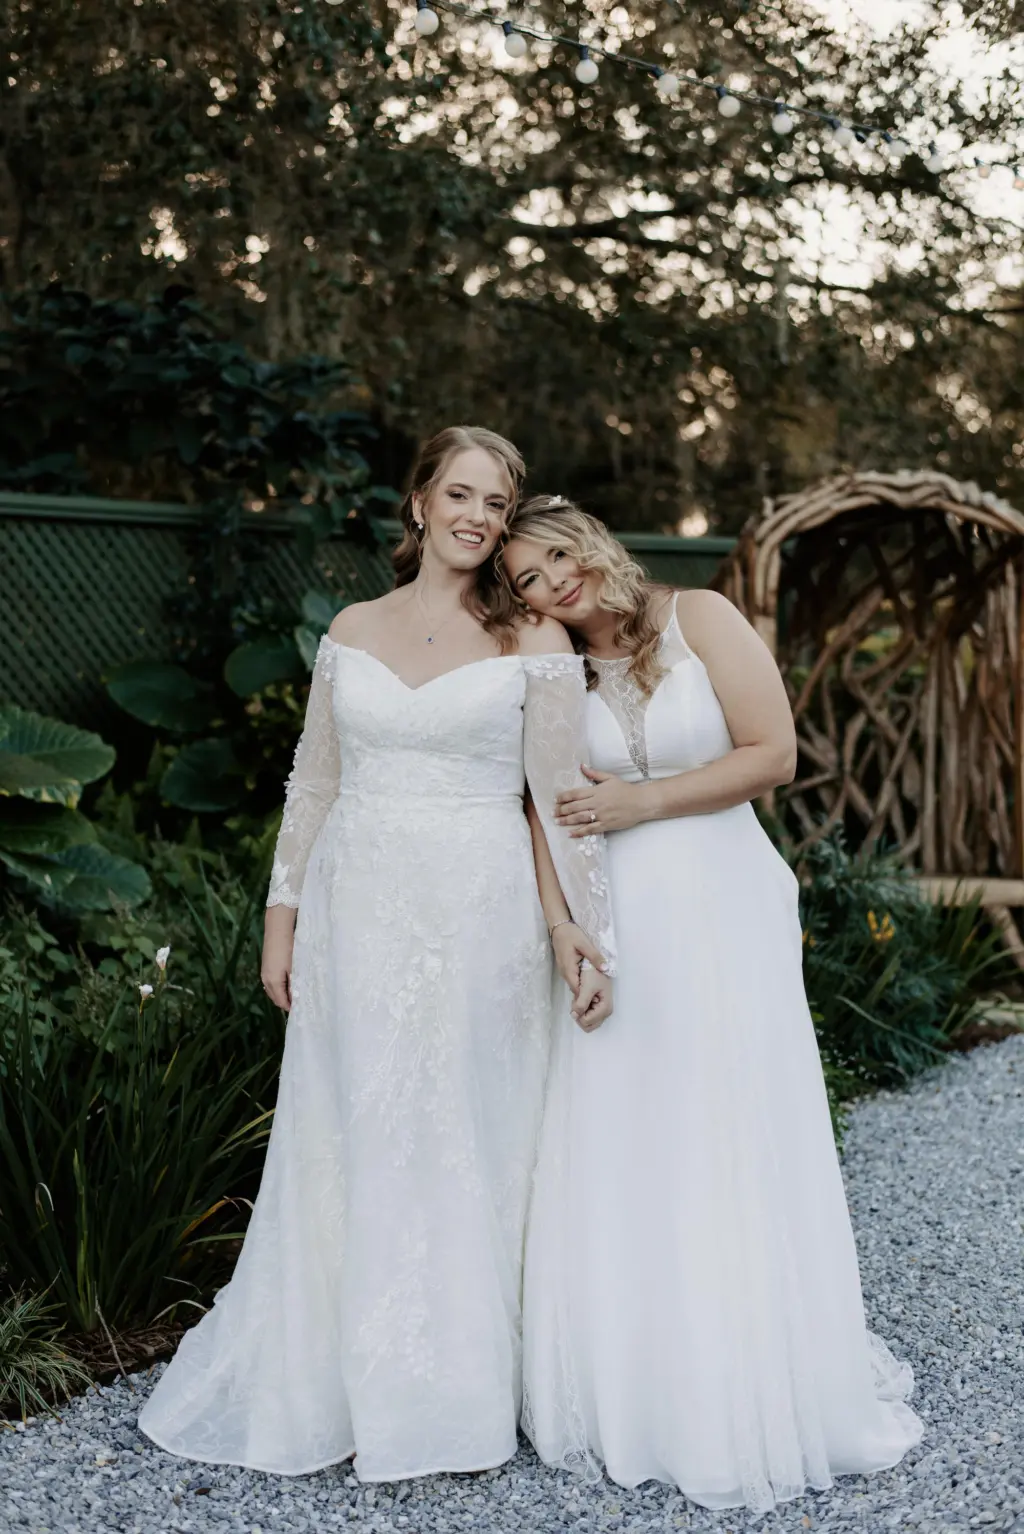 Same Sex Couple First Look Bridal Portraits at Garden Wedding Venue | Tampa Wedding Venue Mill Pond Estates | Planner Stephany Perry Events